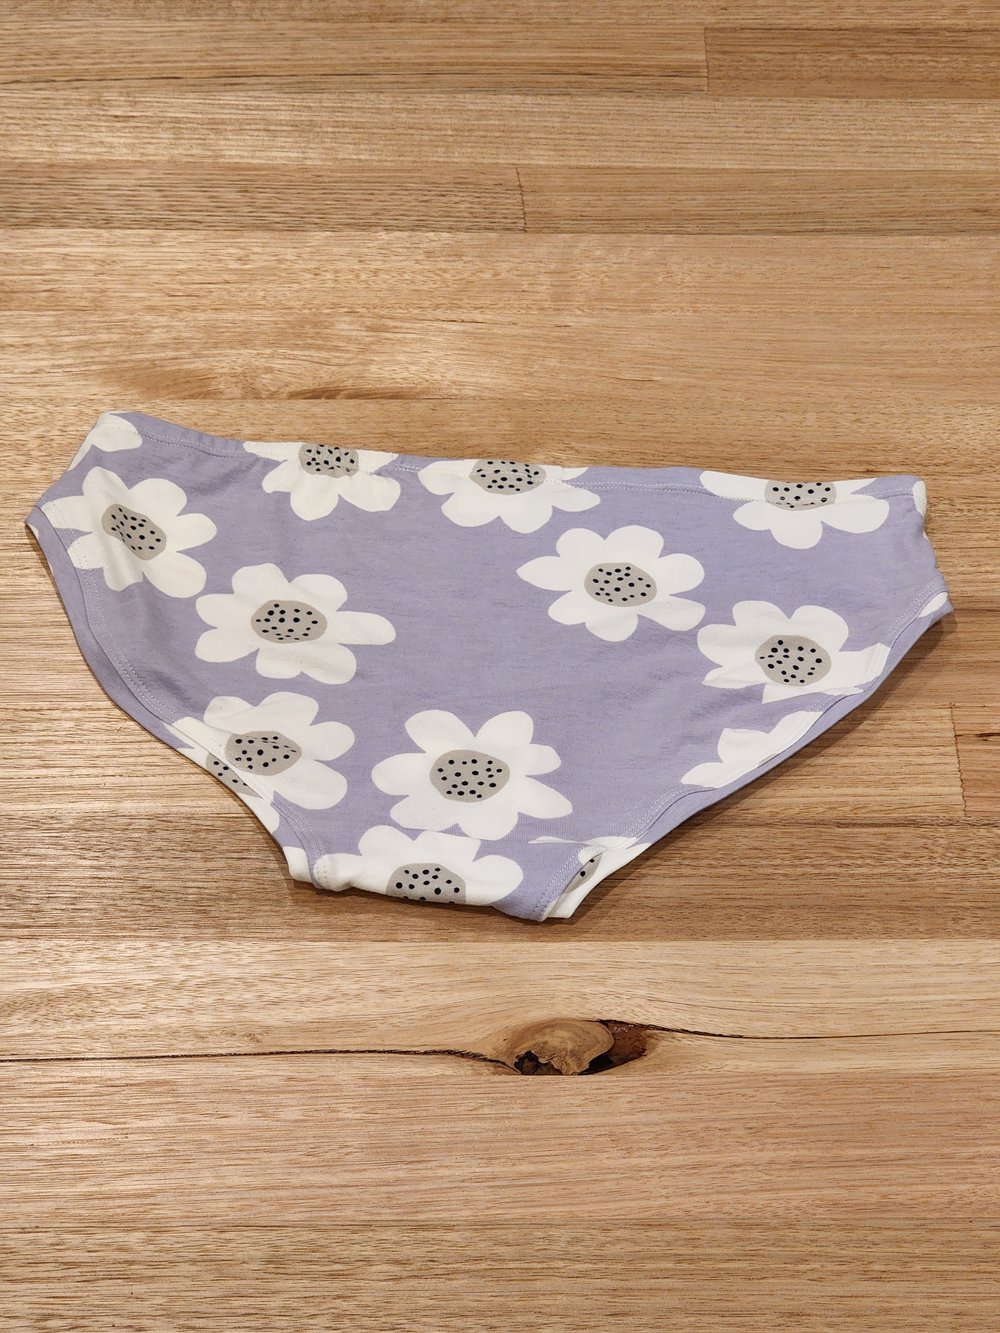 Australian Womens Organic Cotton Underwear Daisies Hand Made in Melbourne -  Hipsters - Plus Size — by Audrey & Grace